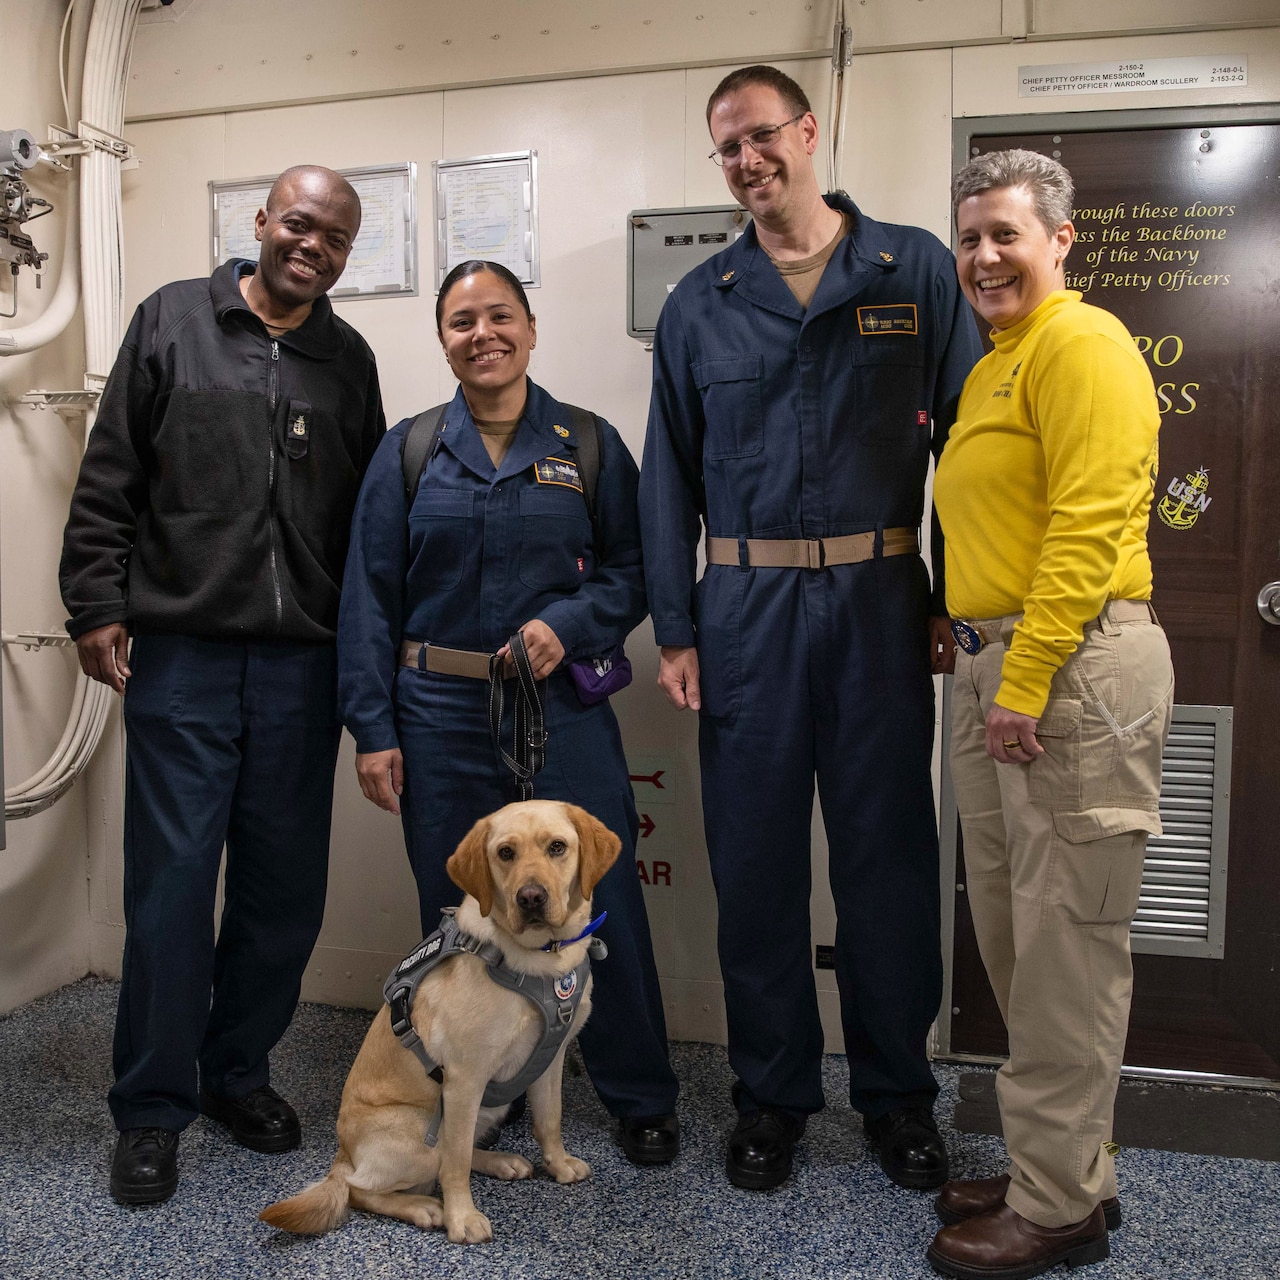 A dog sits in front of four smiling, standing sailors in a room.